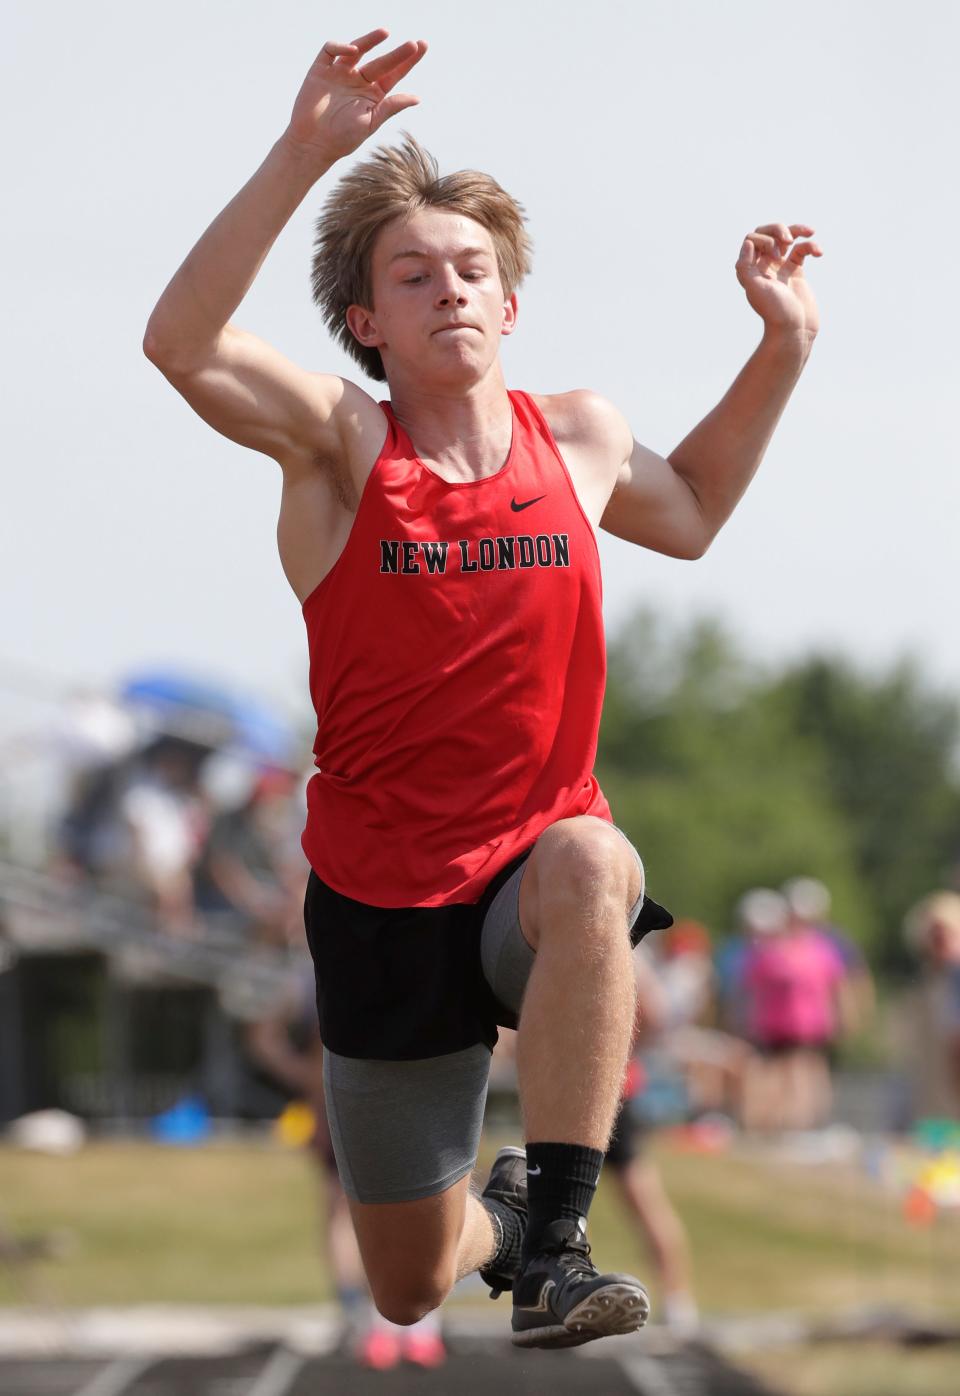 New London's Kyle Wisniewski has the top area leap in the long jump and second-best jump in the triple jump in the latest prep track and field honor roll.